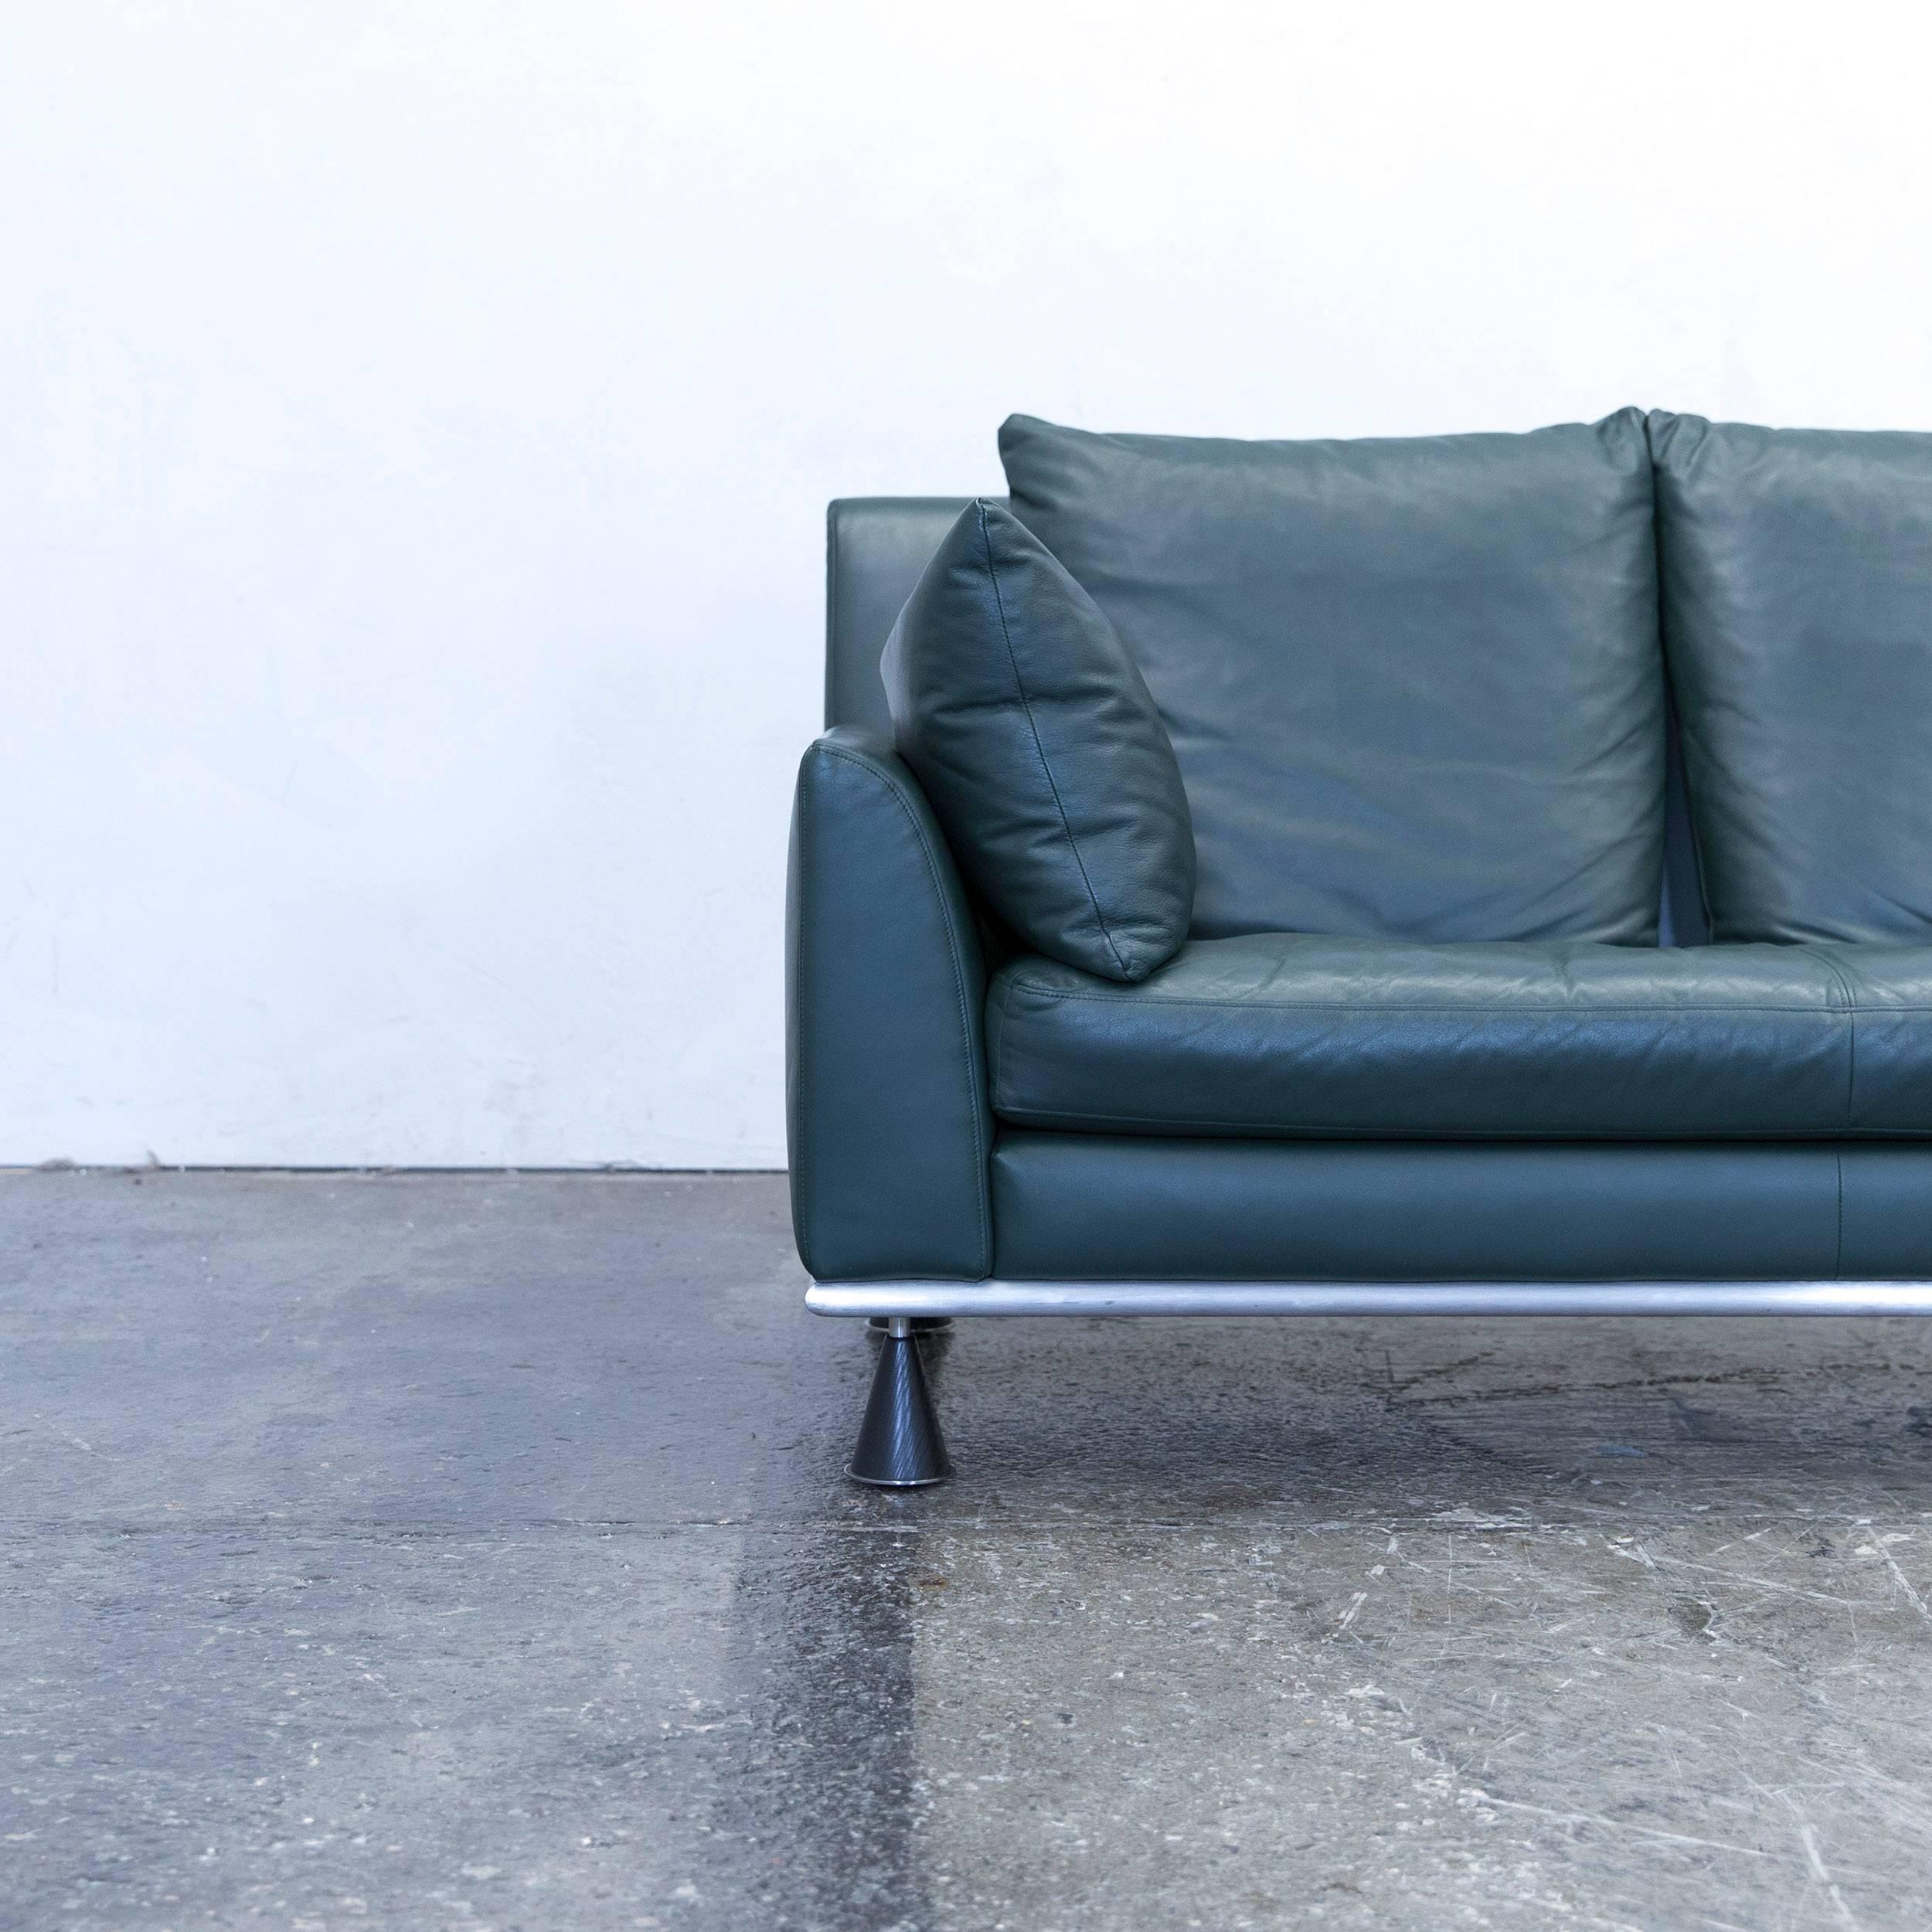 Green colored original Rolf Benz designer leather sofa in a minimalistic and modern design, made for pure comfort.